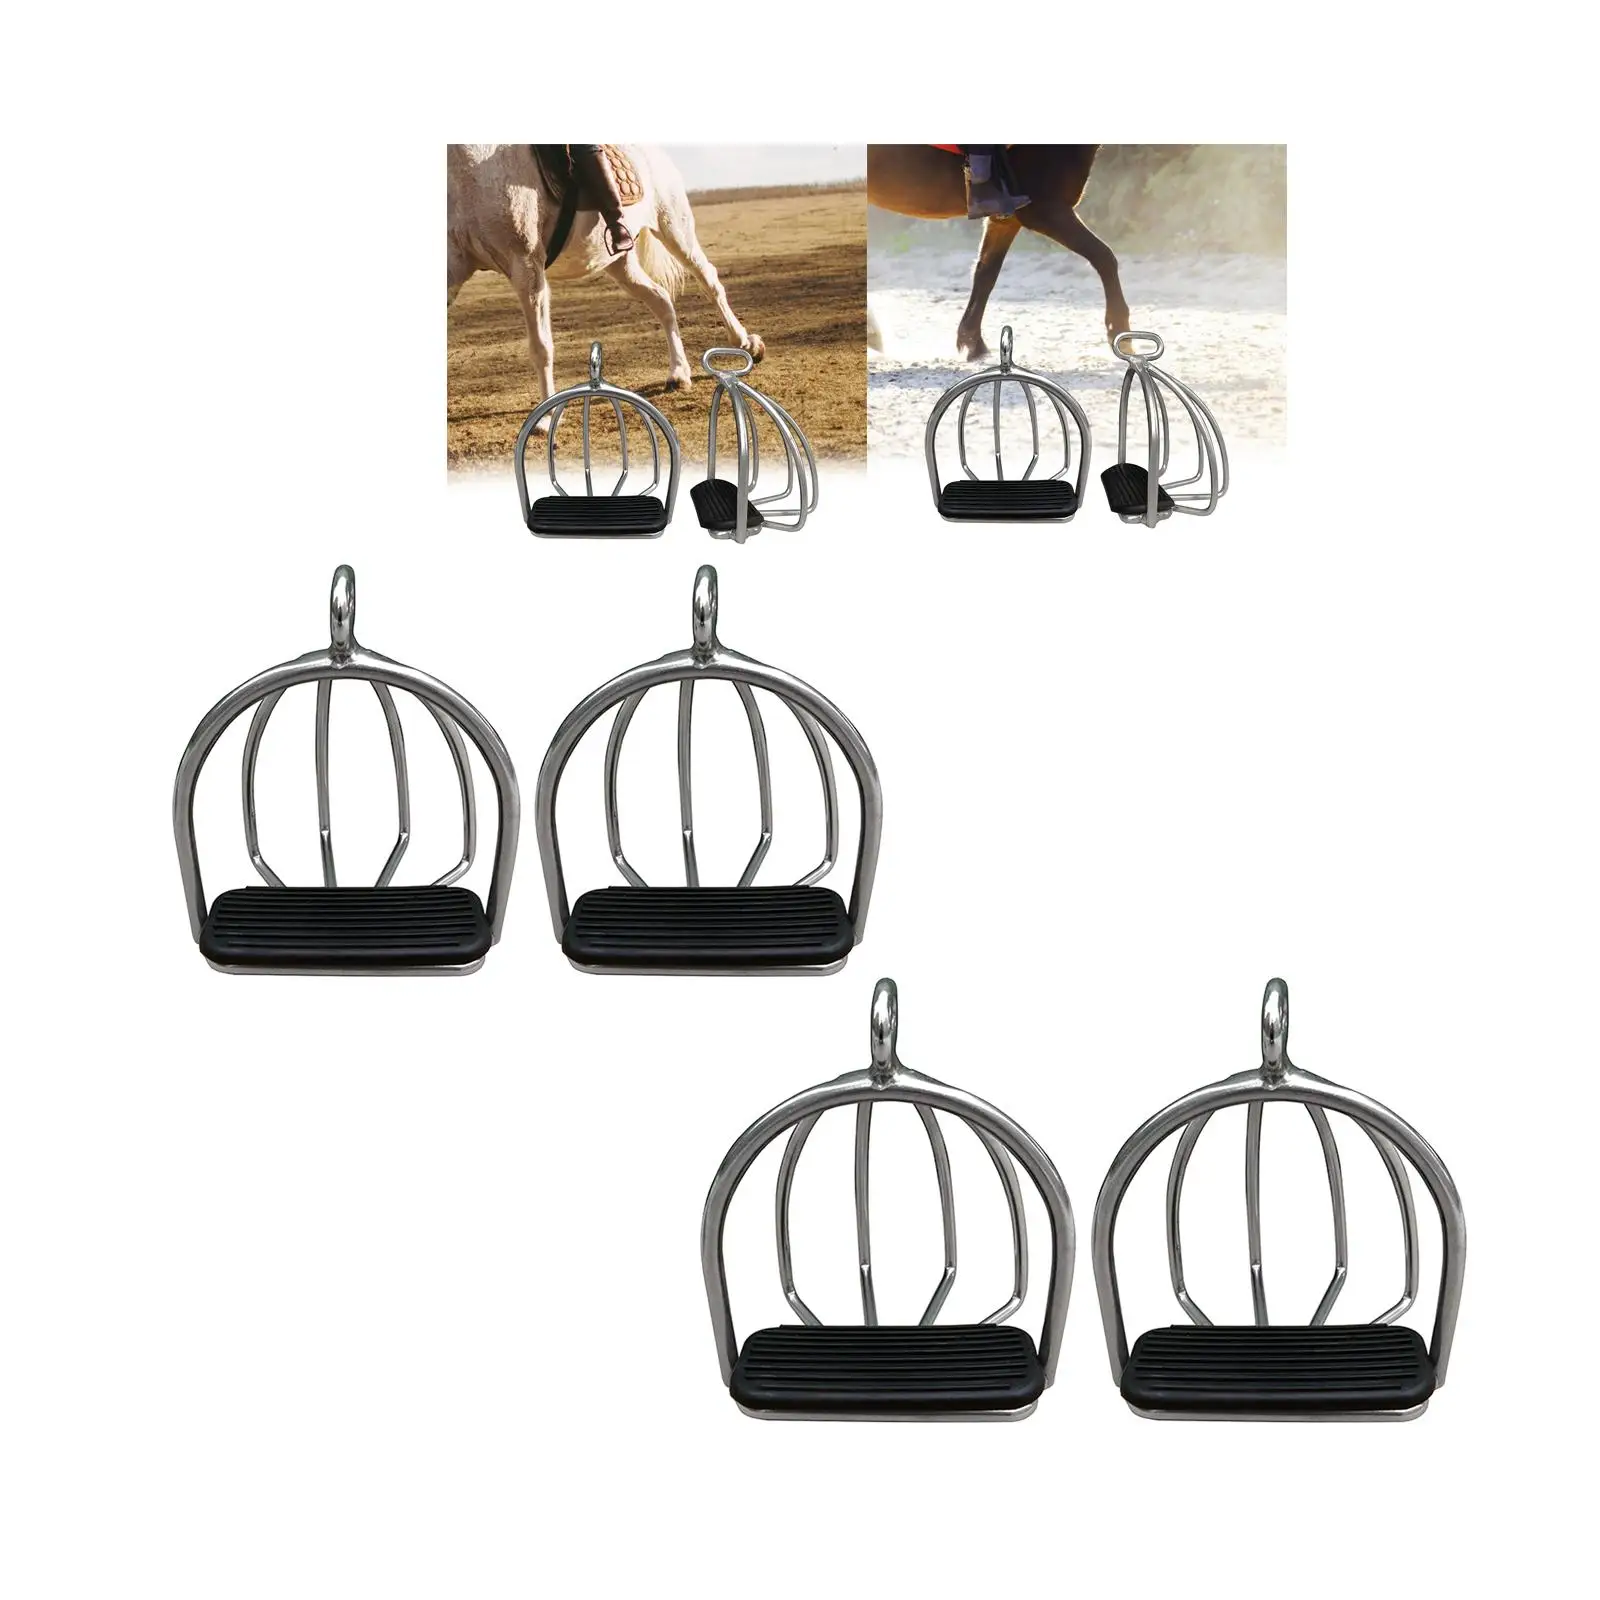 1Pair Horse Riding Stirrups Training Tool High Strength Flexible Equestrian Sports Steel for Safety Horse Riding Accessories